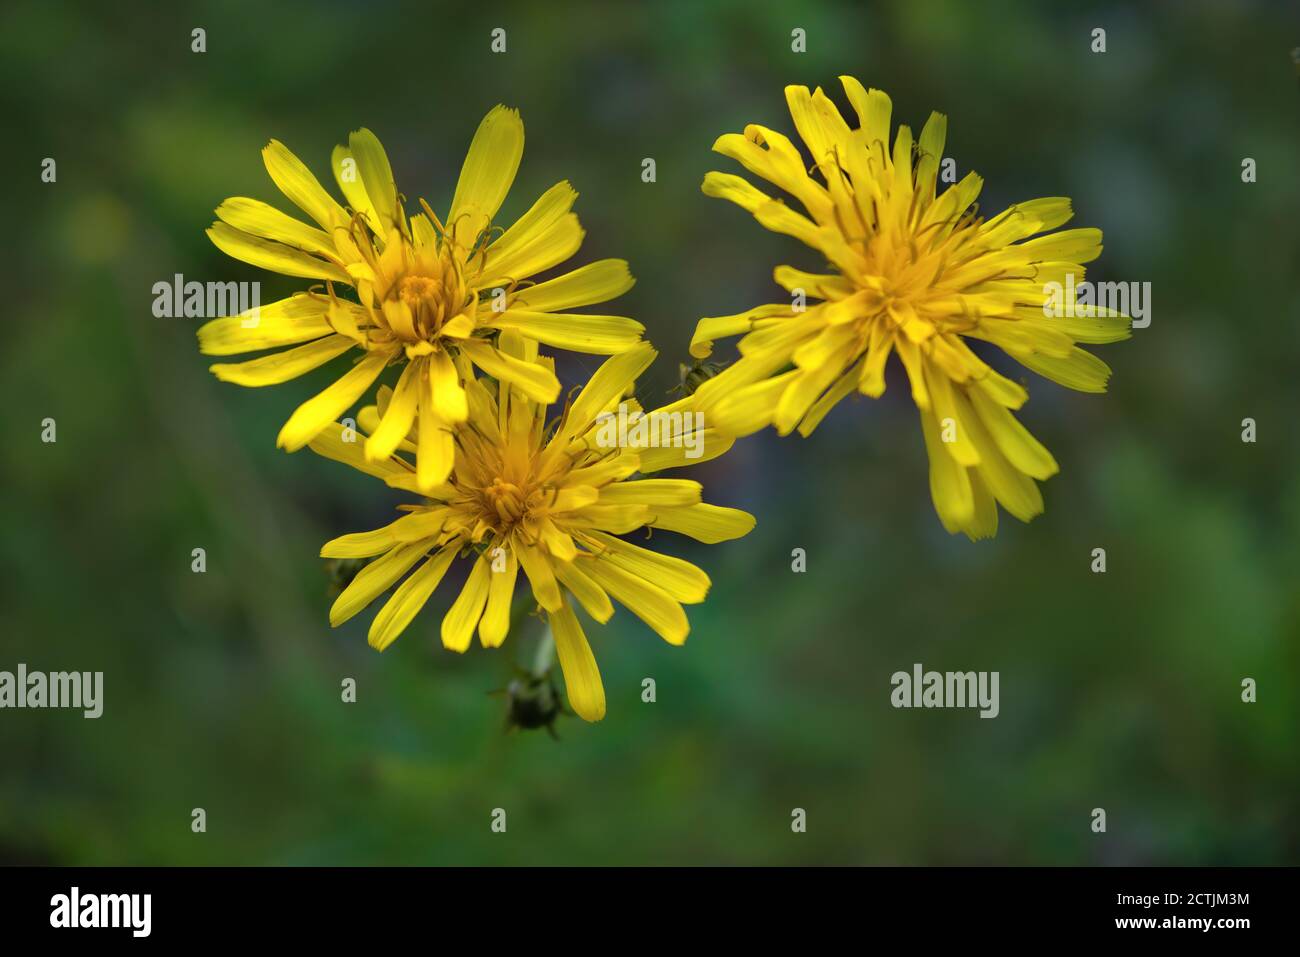 Yellow wildflowers on a blurred natural background close-up. Stock Photo